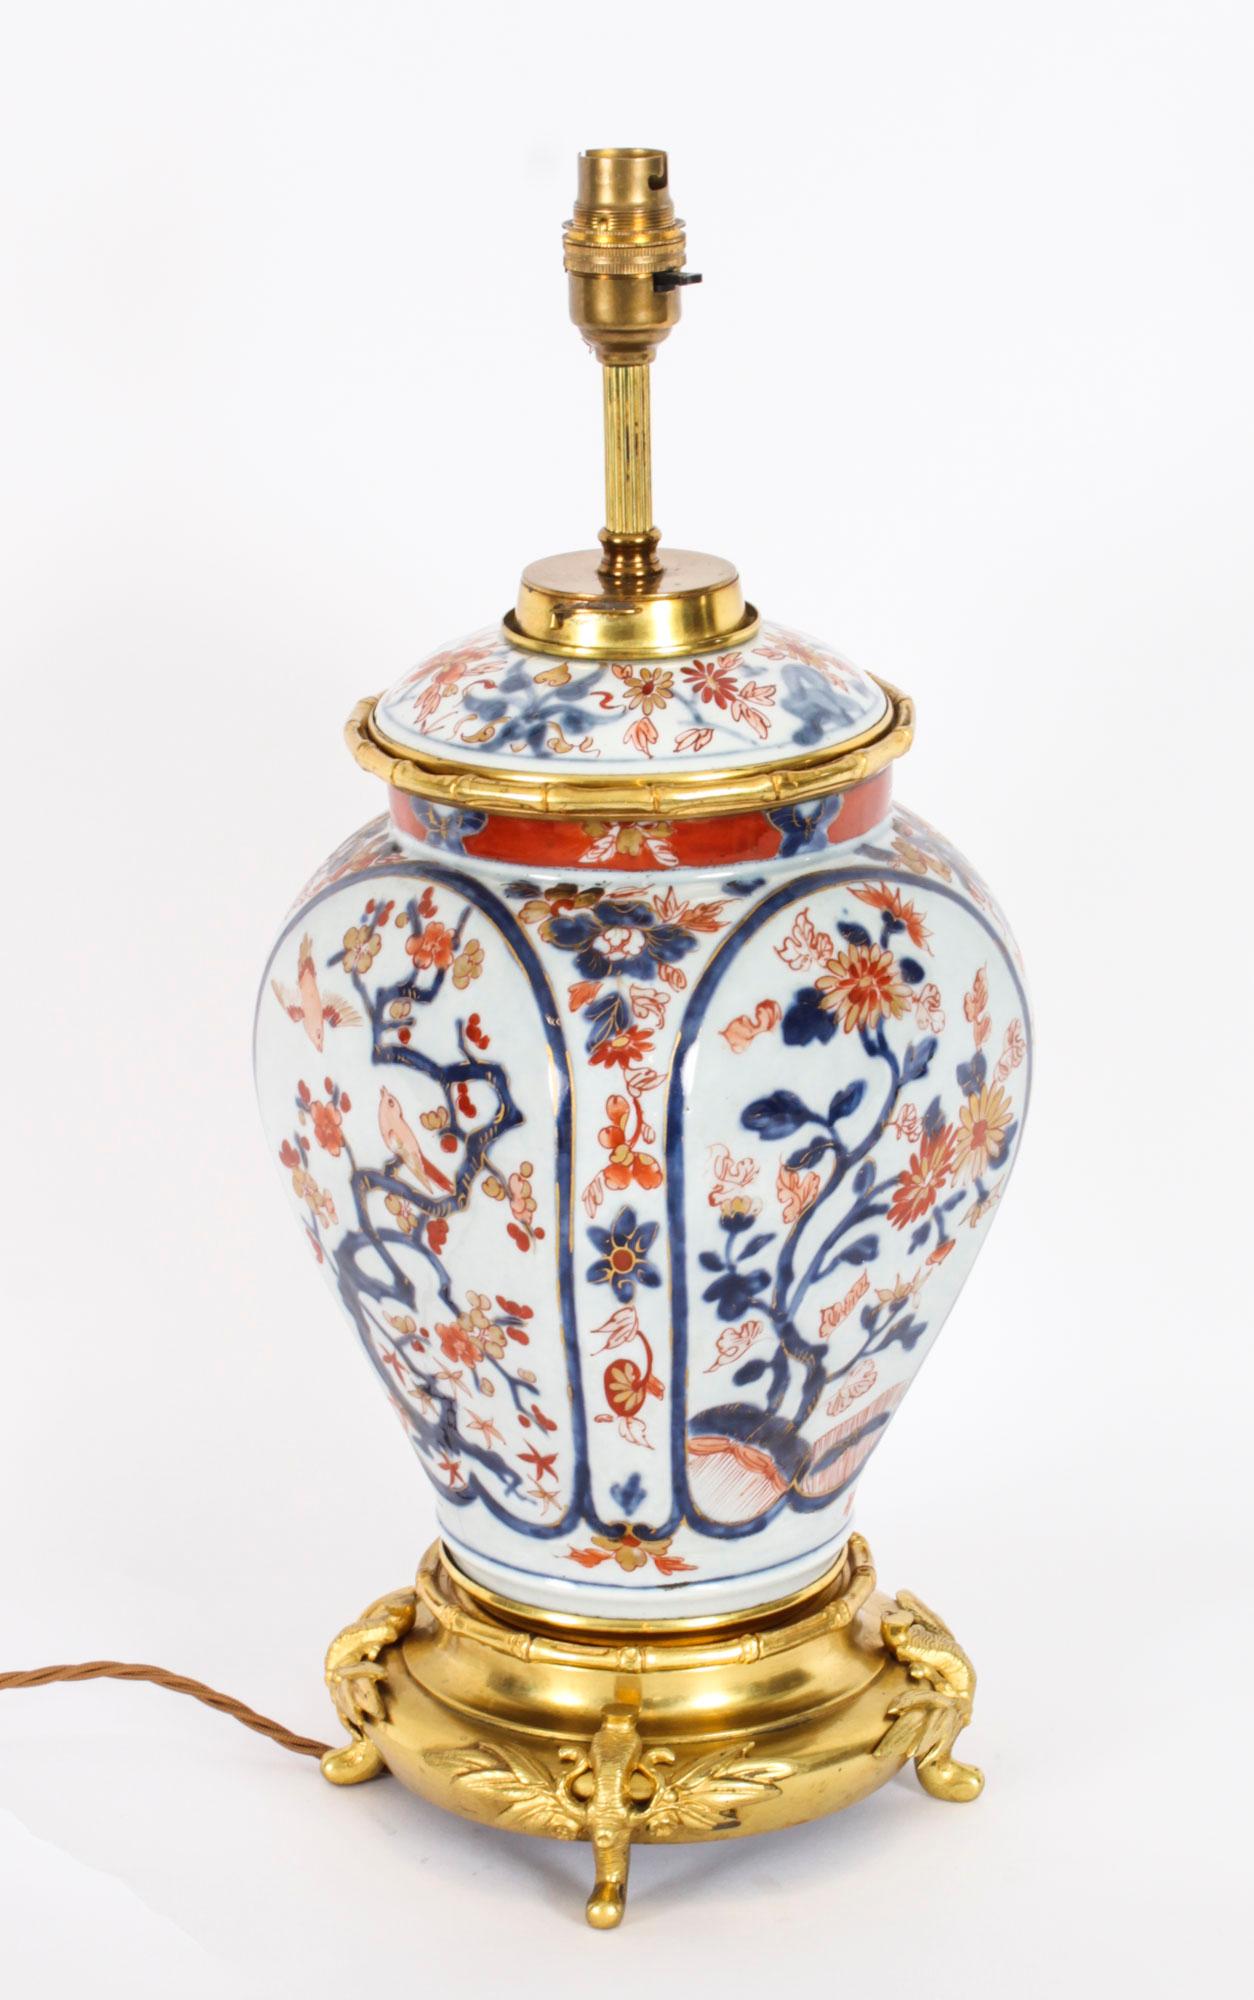 This is a superb decorative Japanese Imari table lamp on stand, circa 1840 in date.
 
The lamp has a bulbous shape and features Japanese decoration in the traditional Imari colour scheme of blue orange and red, profusely decorated with birds and